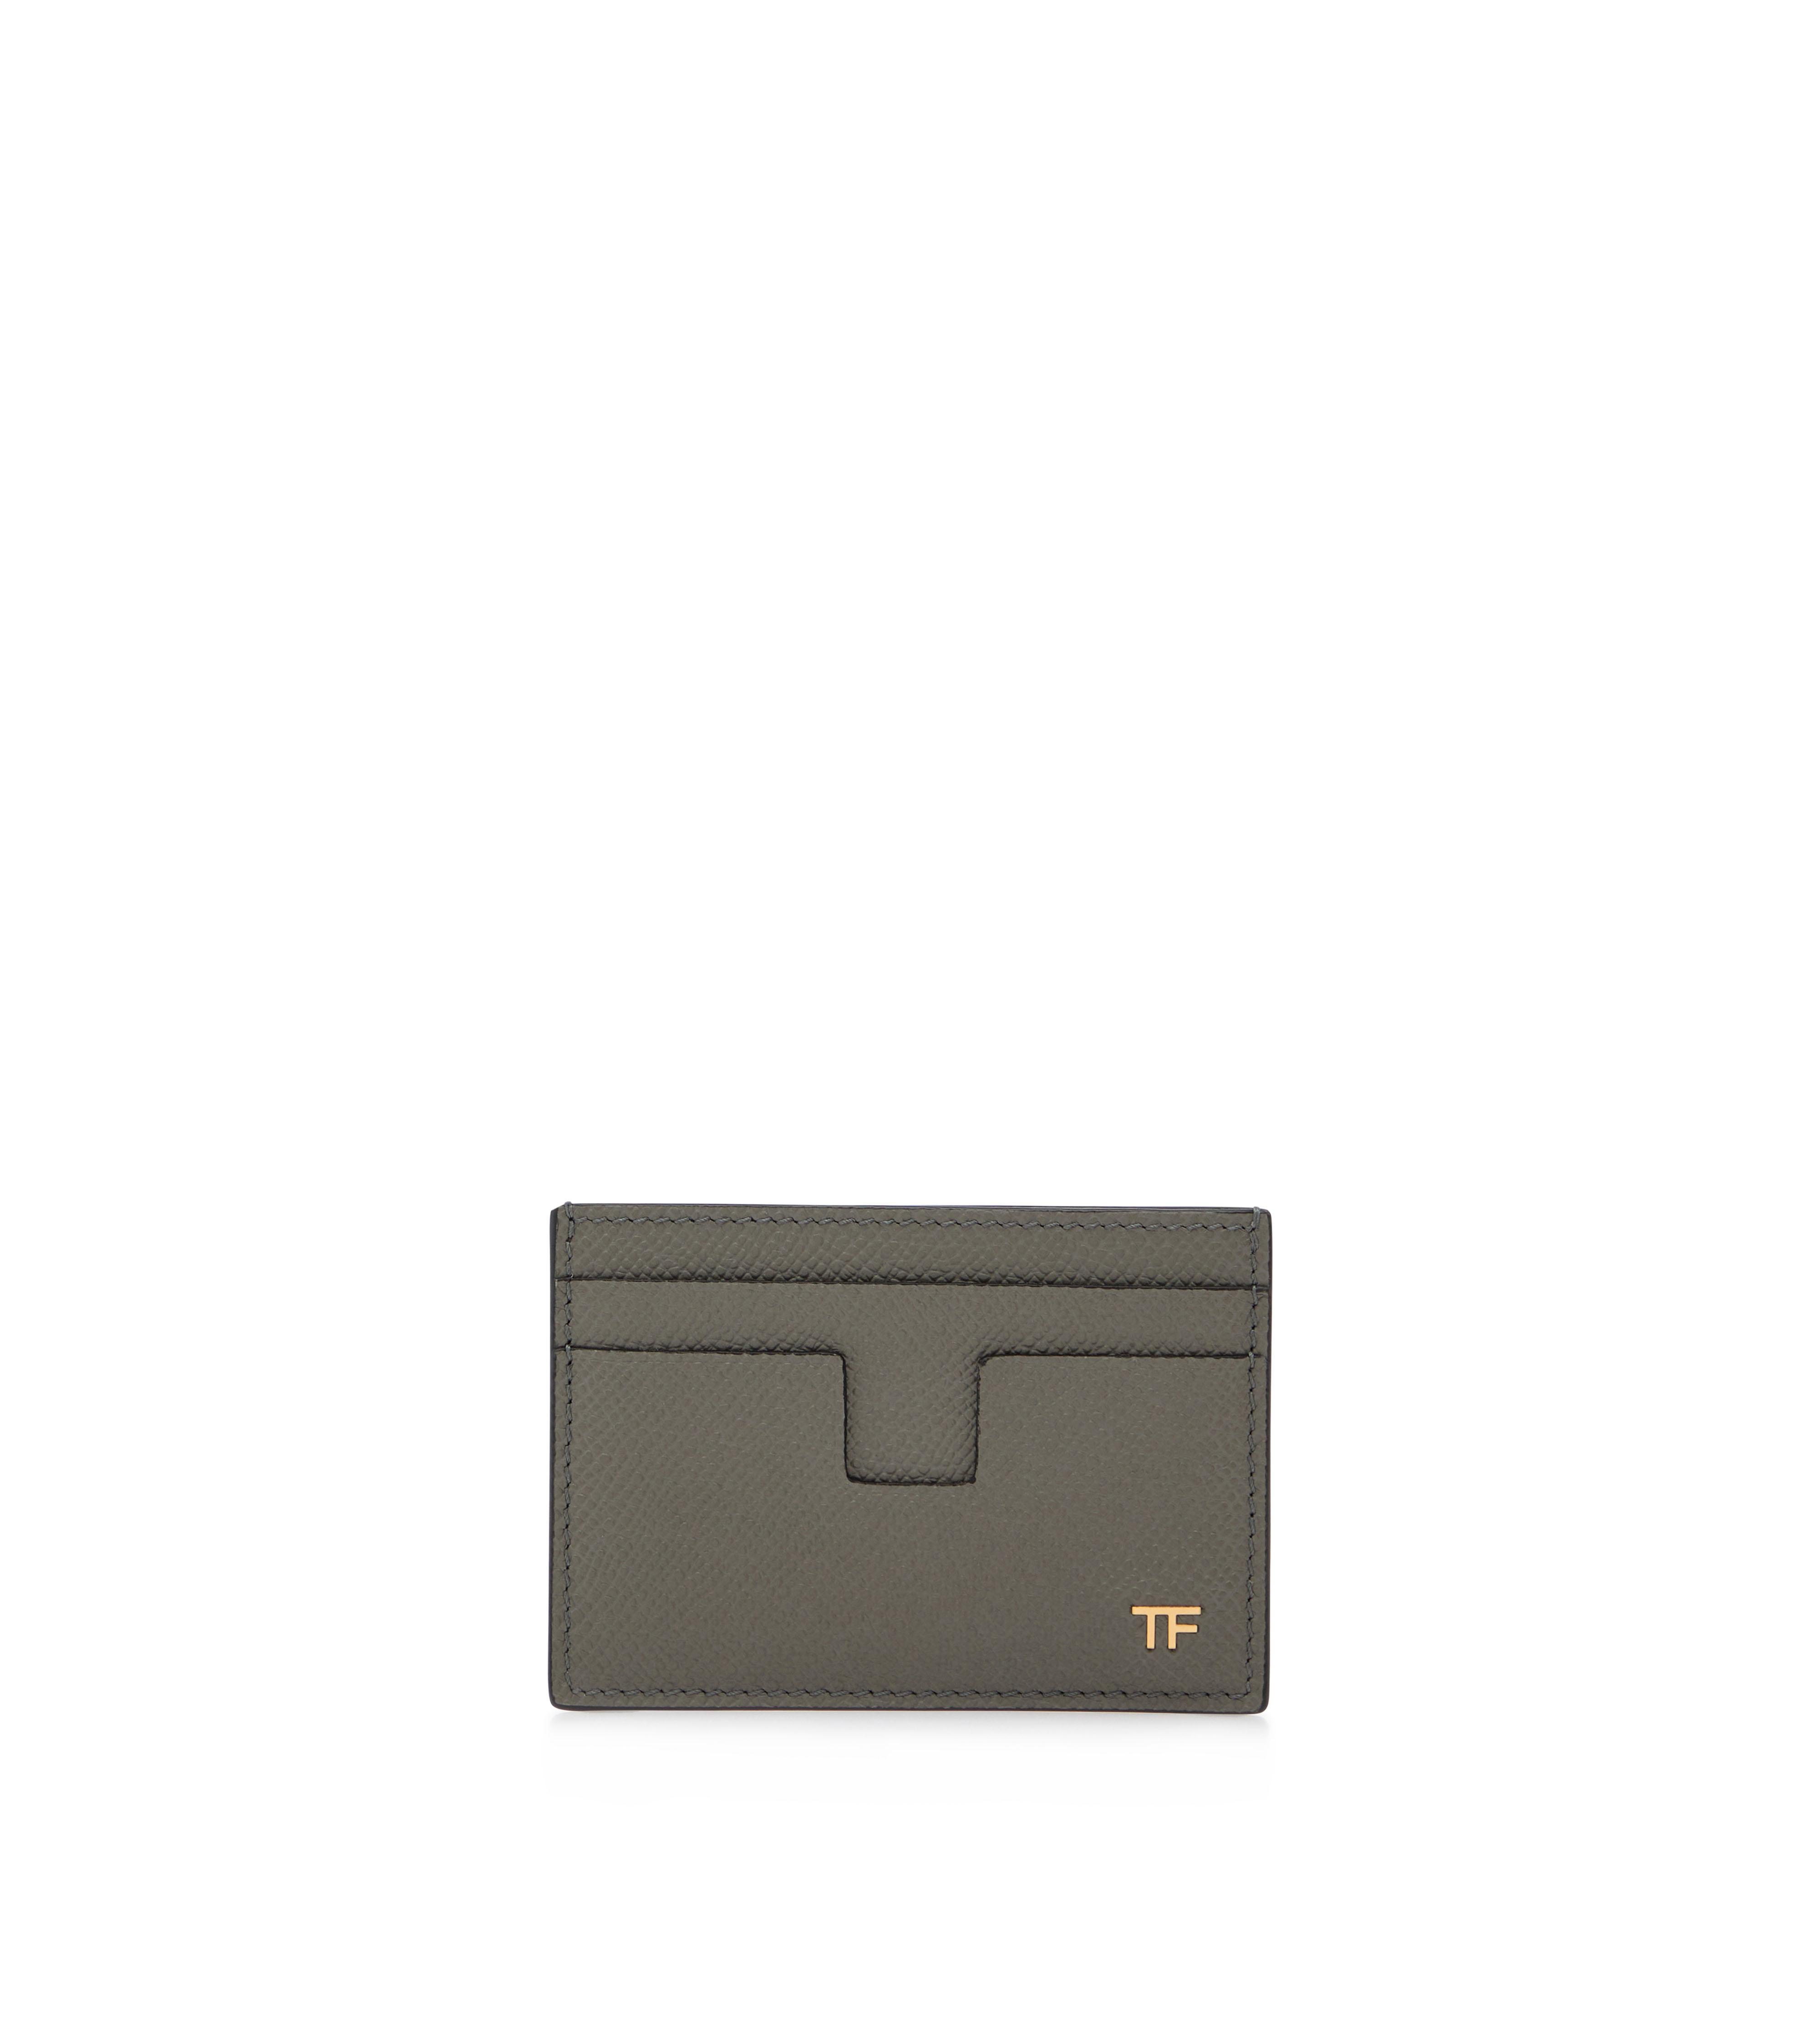 Small Leather Goods - Men's Accessories 